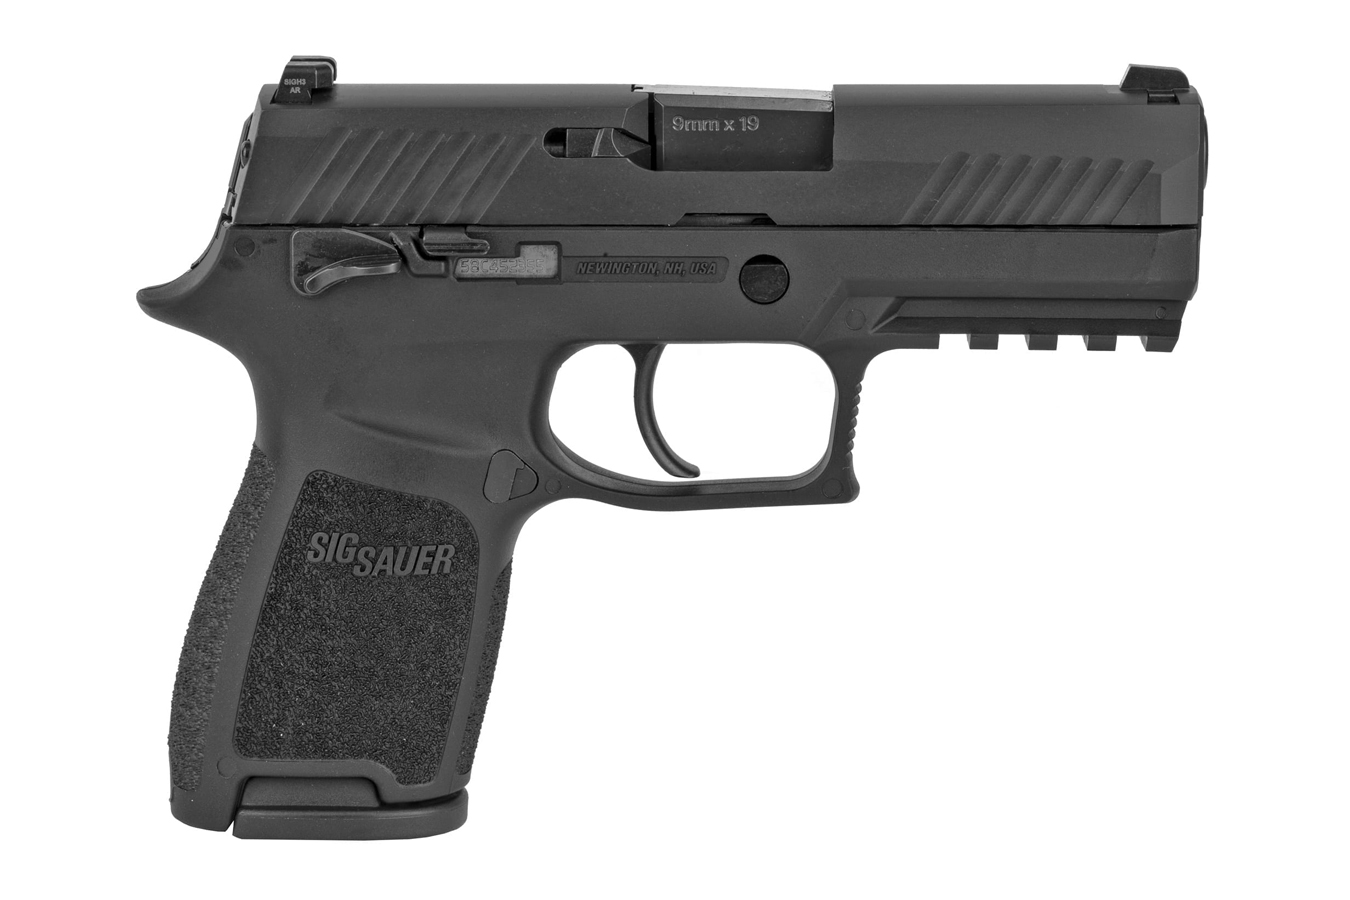 sig-sauer-p320-compact-9mm-striker-fired-pistol-with-night-sights-and